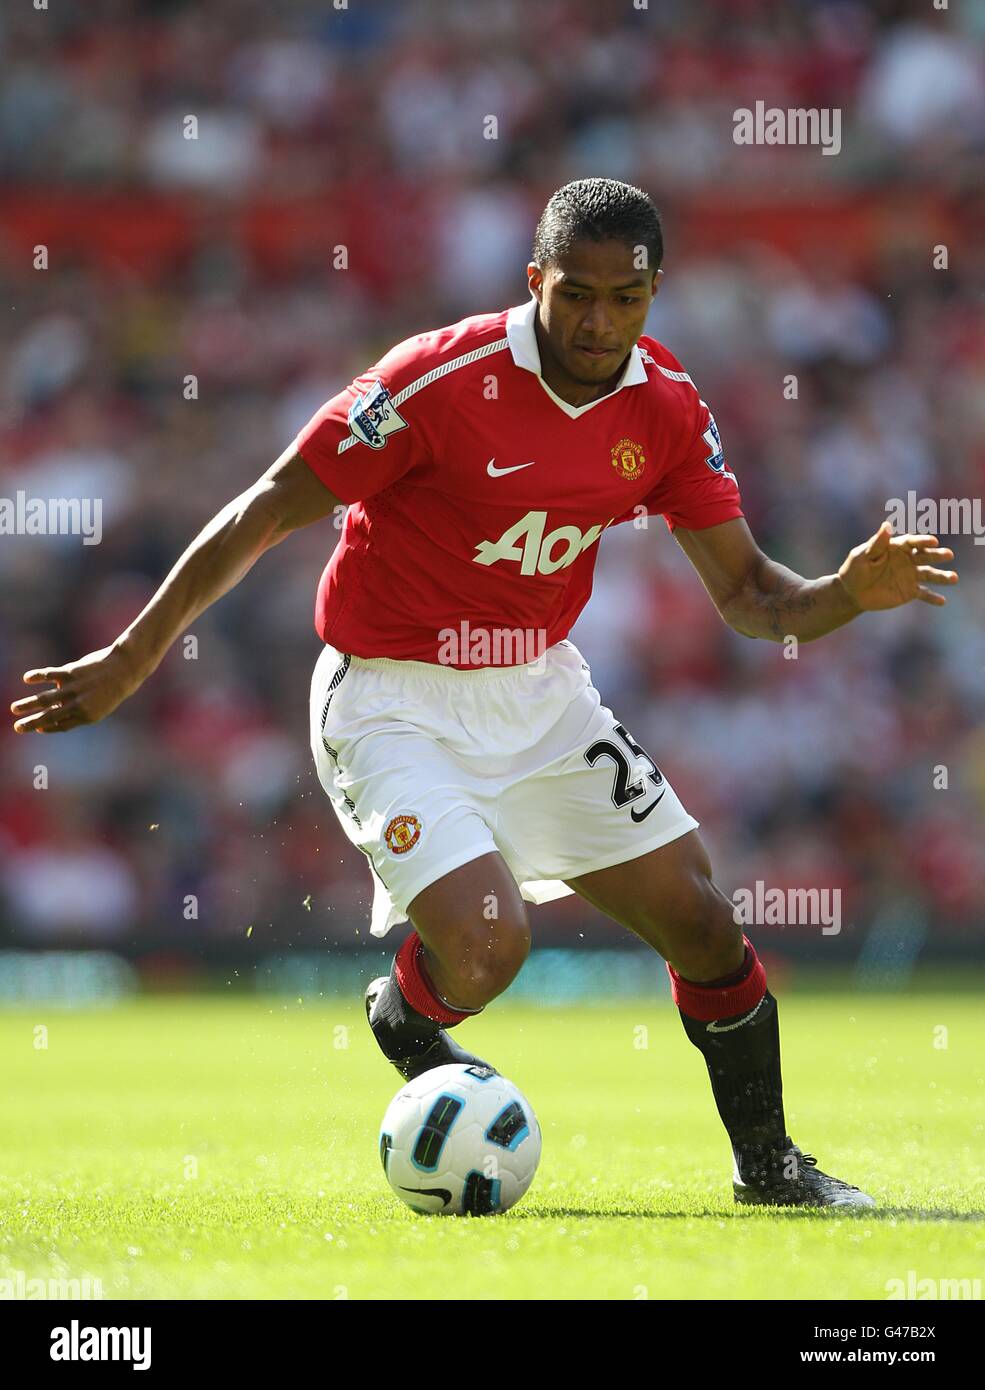 Soccer - Barclays Premier League - Manchester United v Fulham - Old Trafford. Antonio Valencia, Manchester United Stock Photo